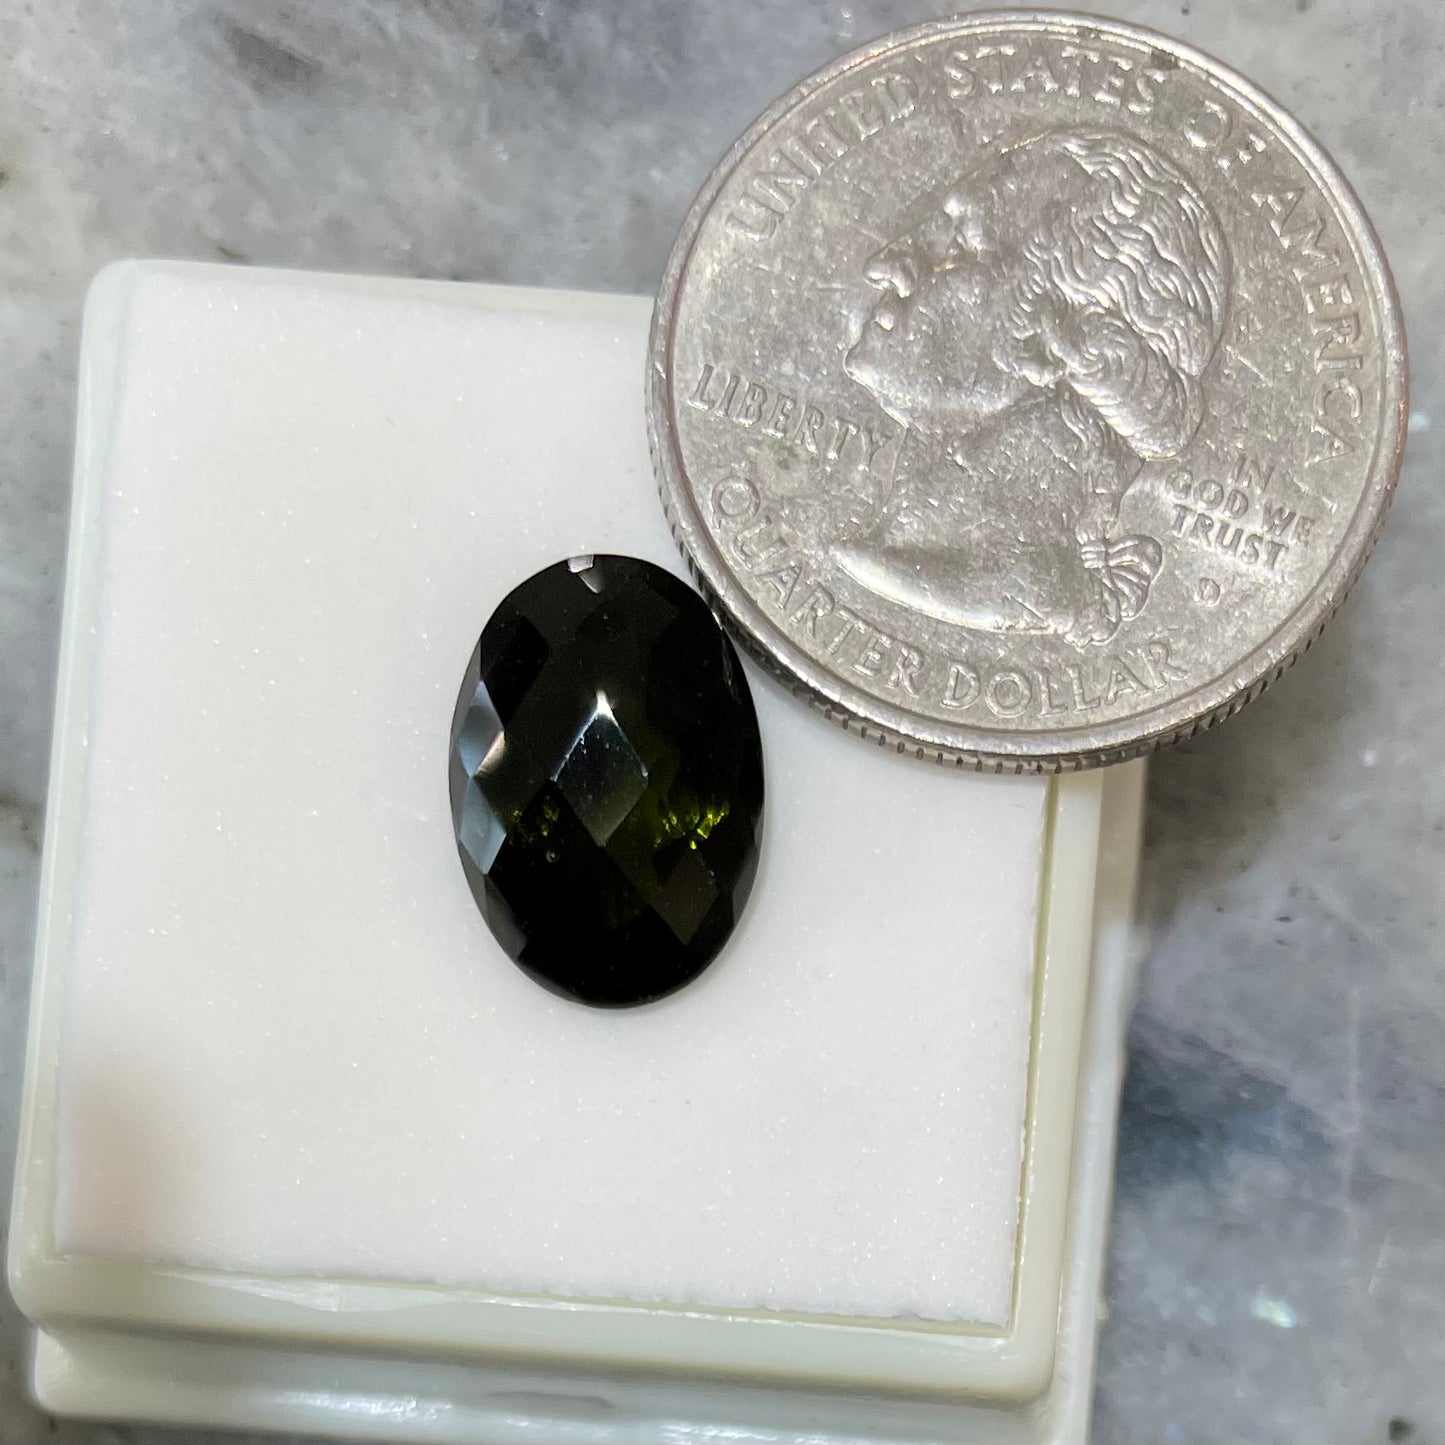 A loose faceted oval checkerboard cut moldavite stone.